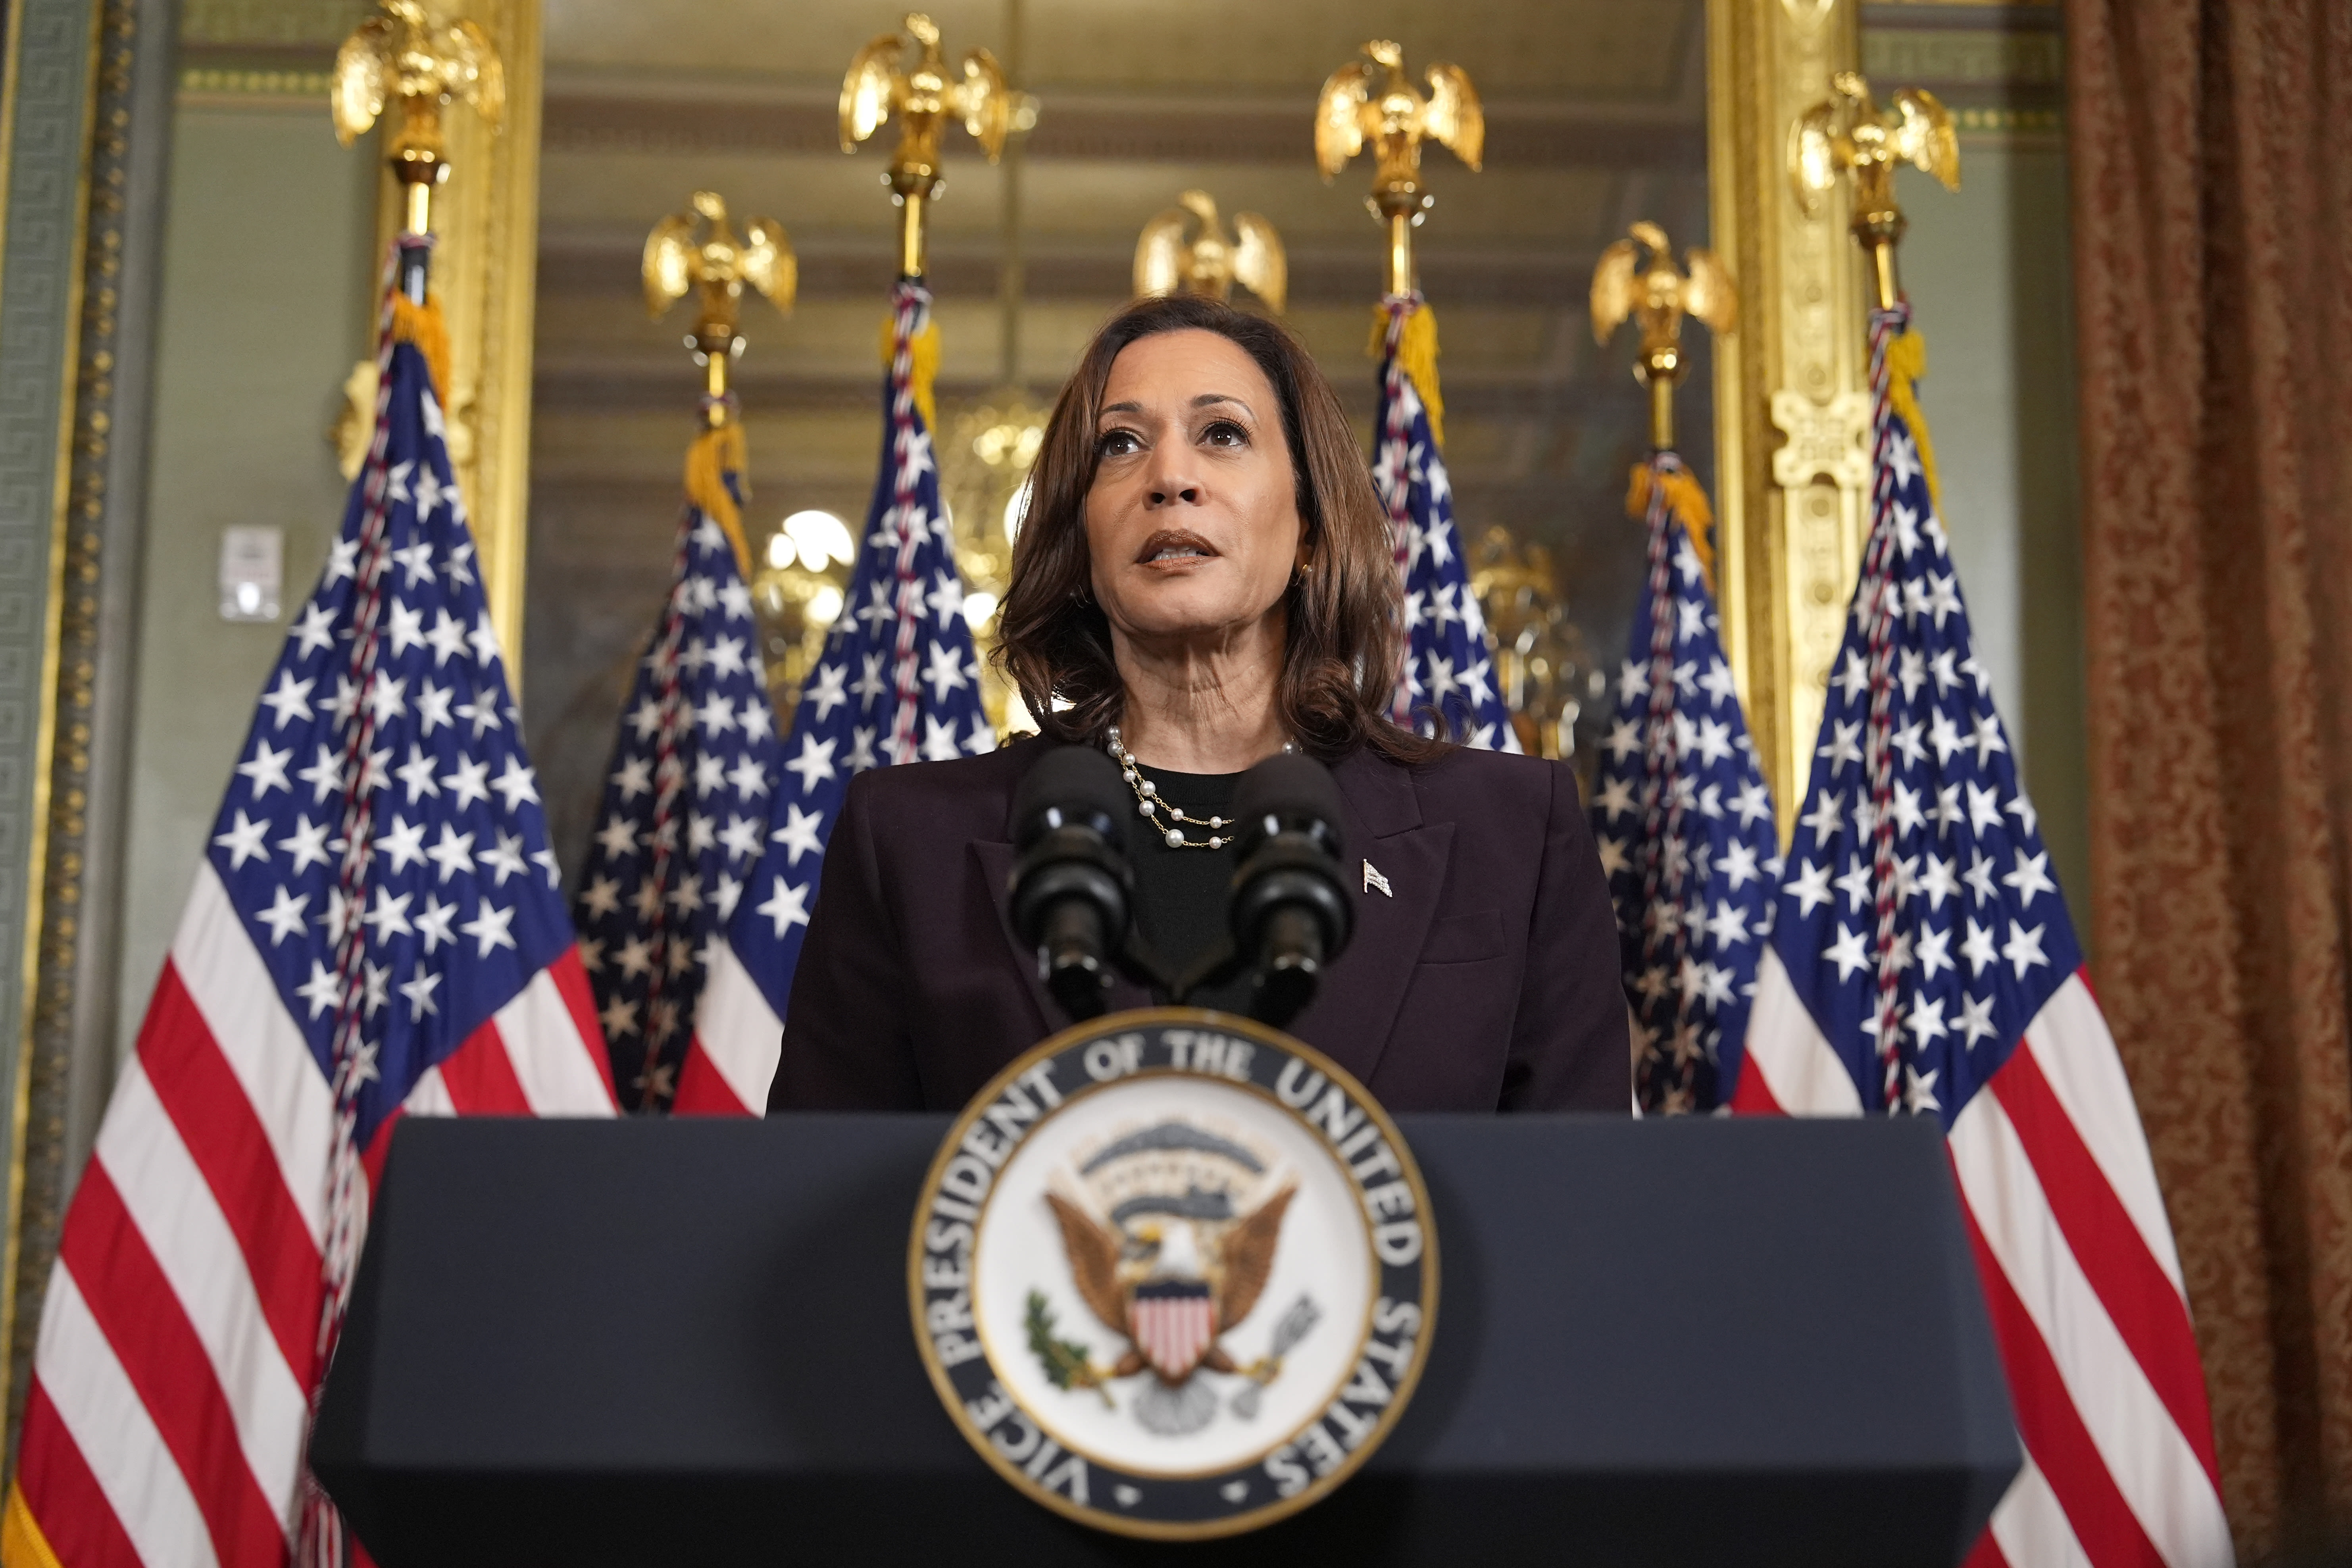 Harris makes a forceful case for Israel-Gaza cease-fire after Netanyahu meeting